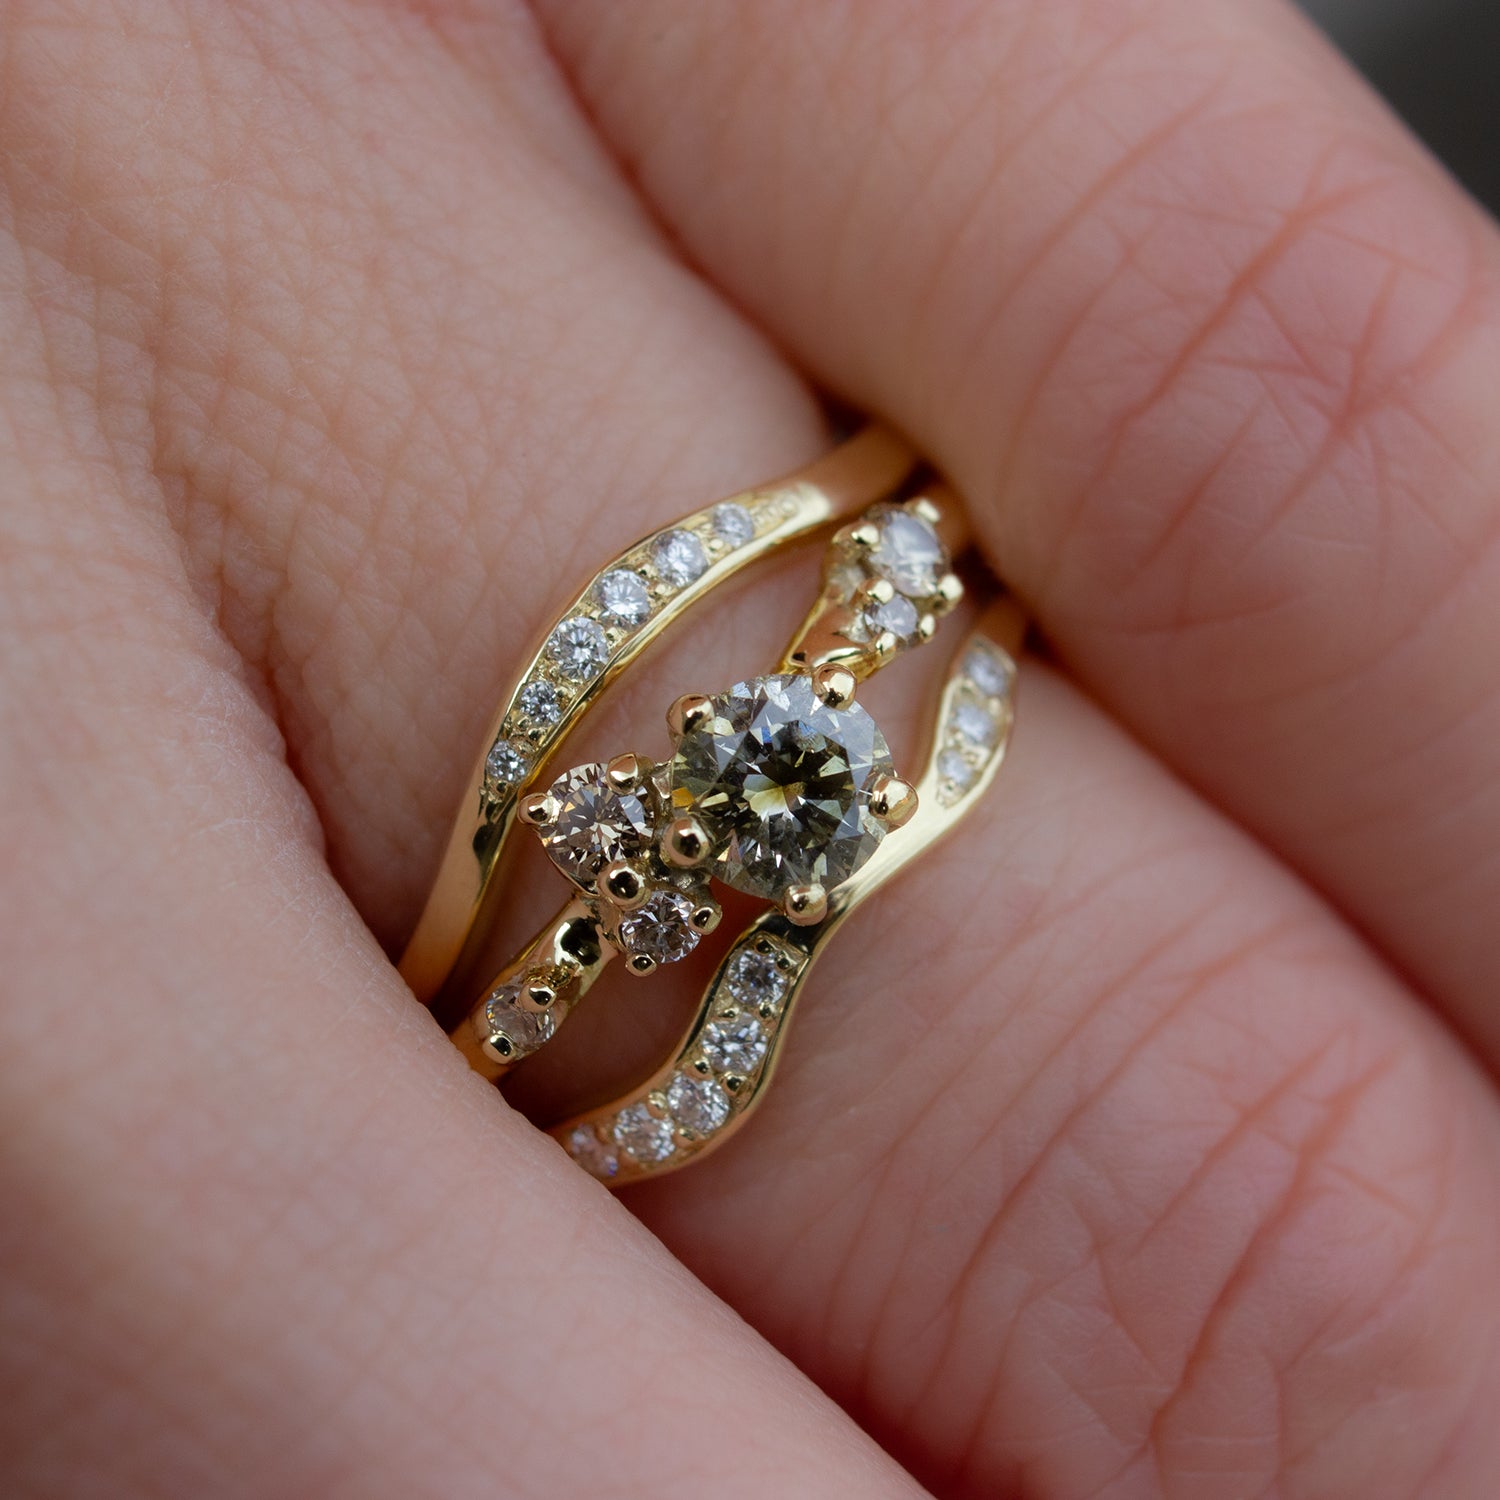 Beautiful and delicate alternative engagement ring featuring champagne diamonds gently scattered along the band. Resembling first flower buds this ring was inspired by. Ring is hugged with two delicately curved wedding bands, both glimmering with white diamonds.